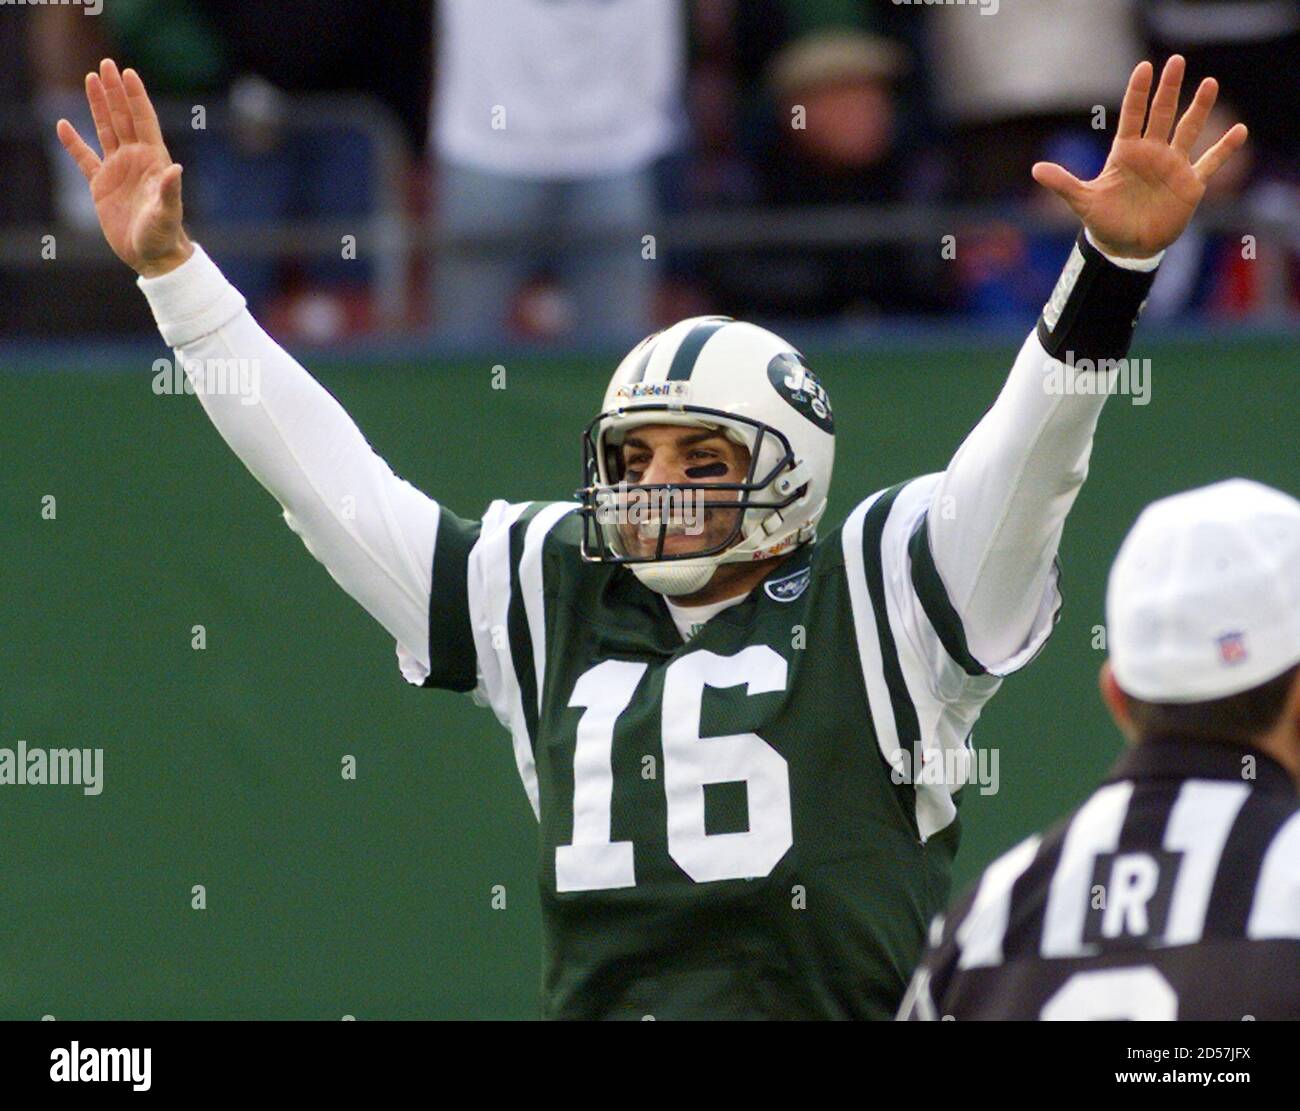 New York Jets quarterback Vinny Testaverde celebrates his second quarter  touchdown pass to running back Curtis Martin during the Jets' game against  the New England Patriots at Giants Stadium in East Rutherford,